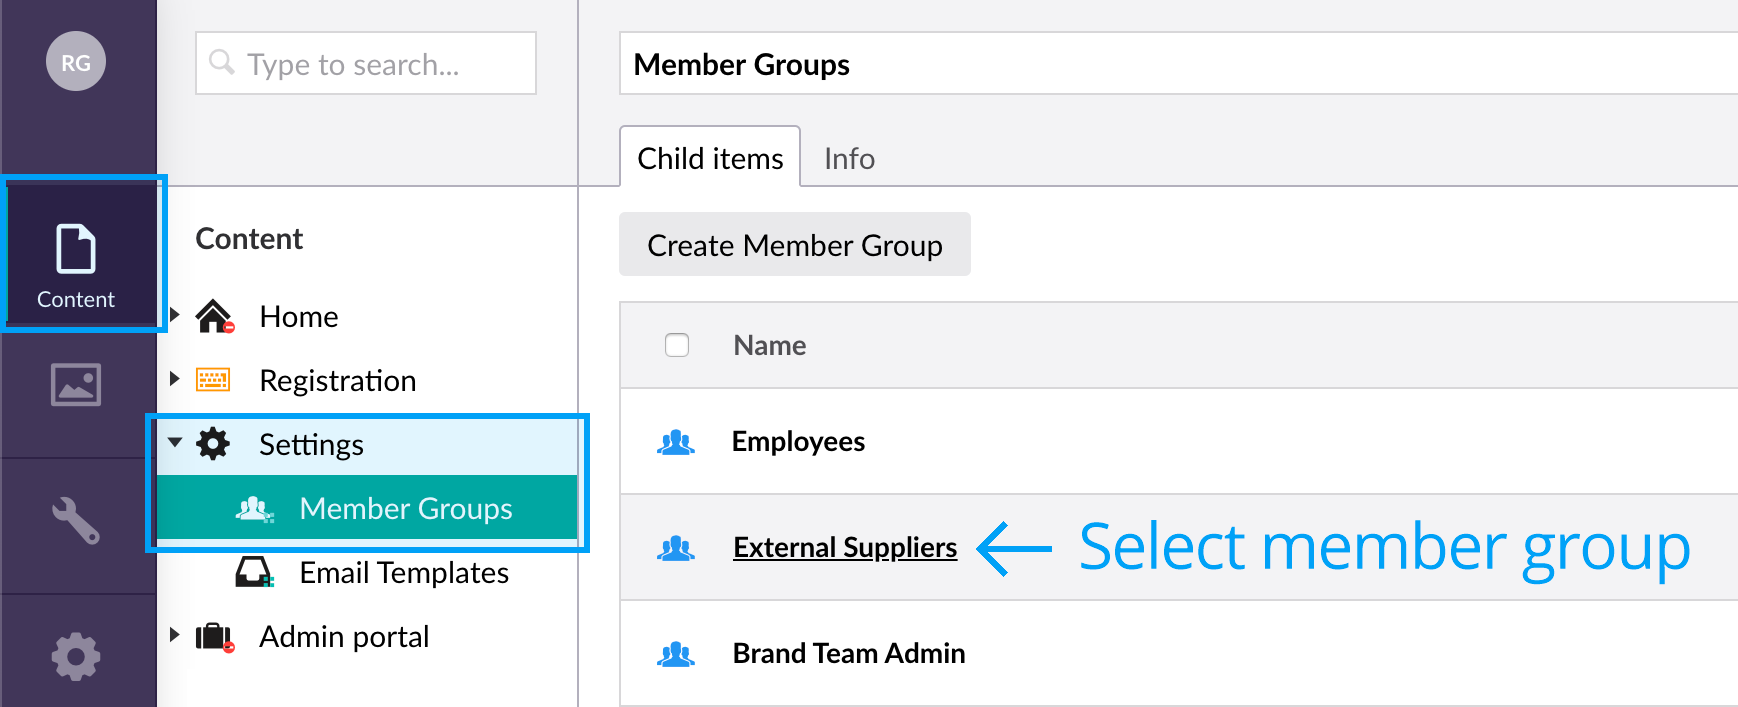 Select the member group in the settings section